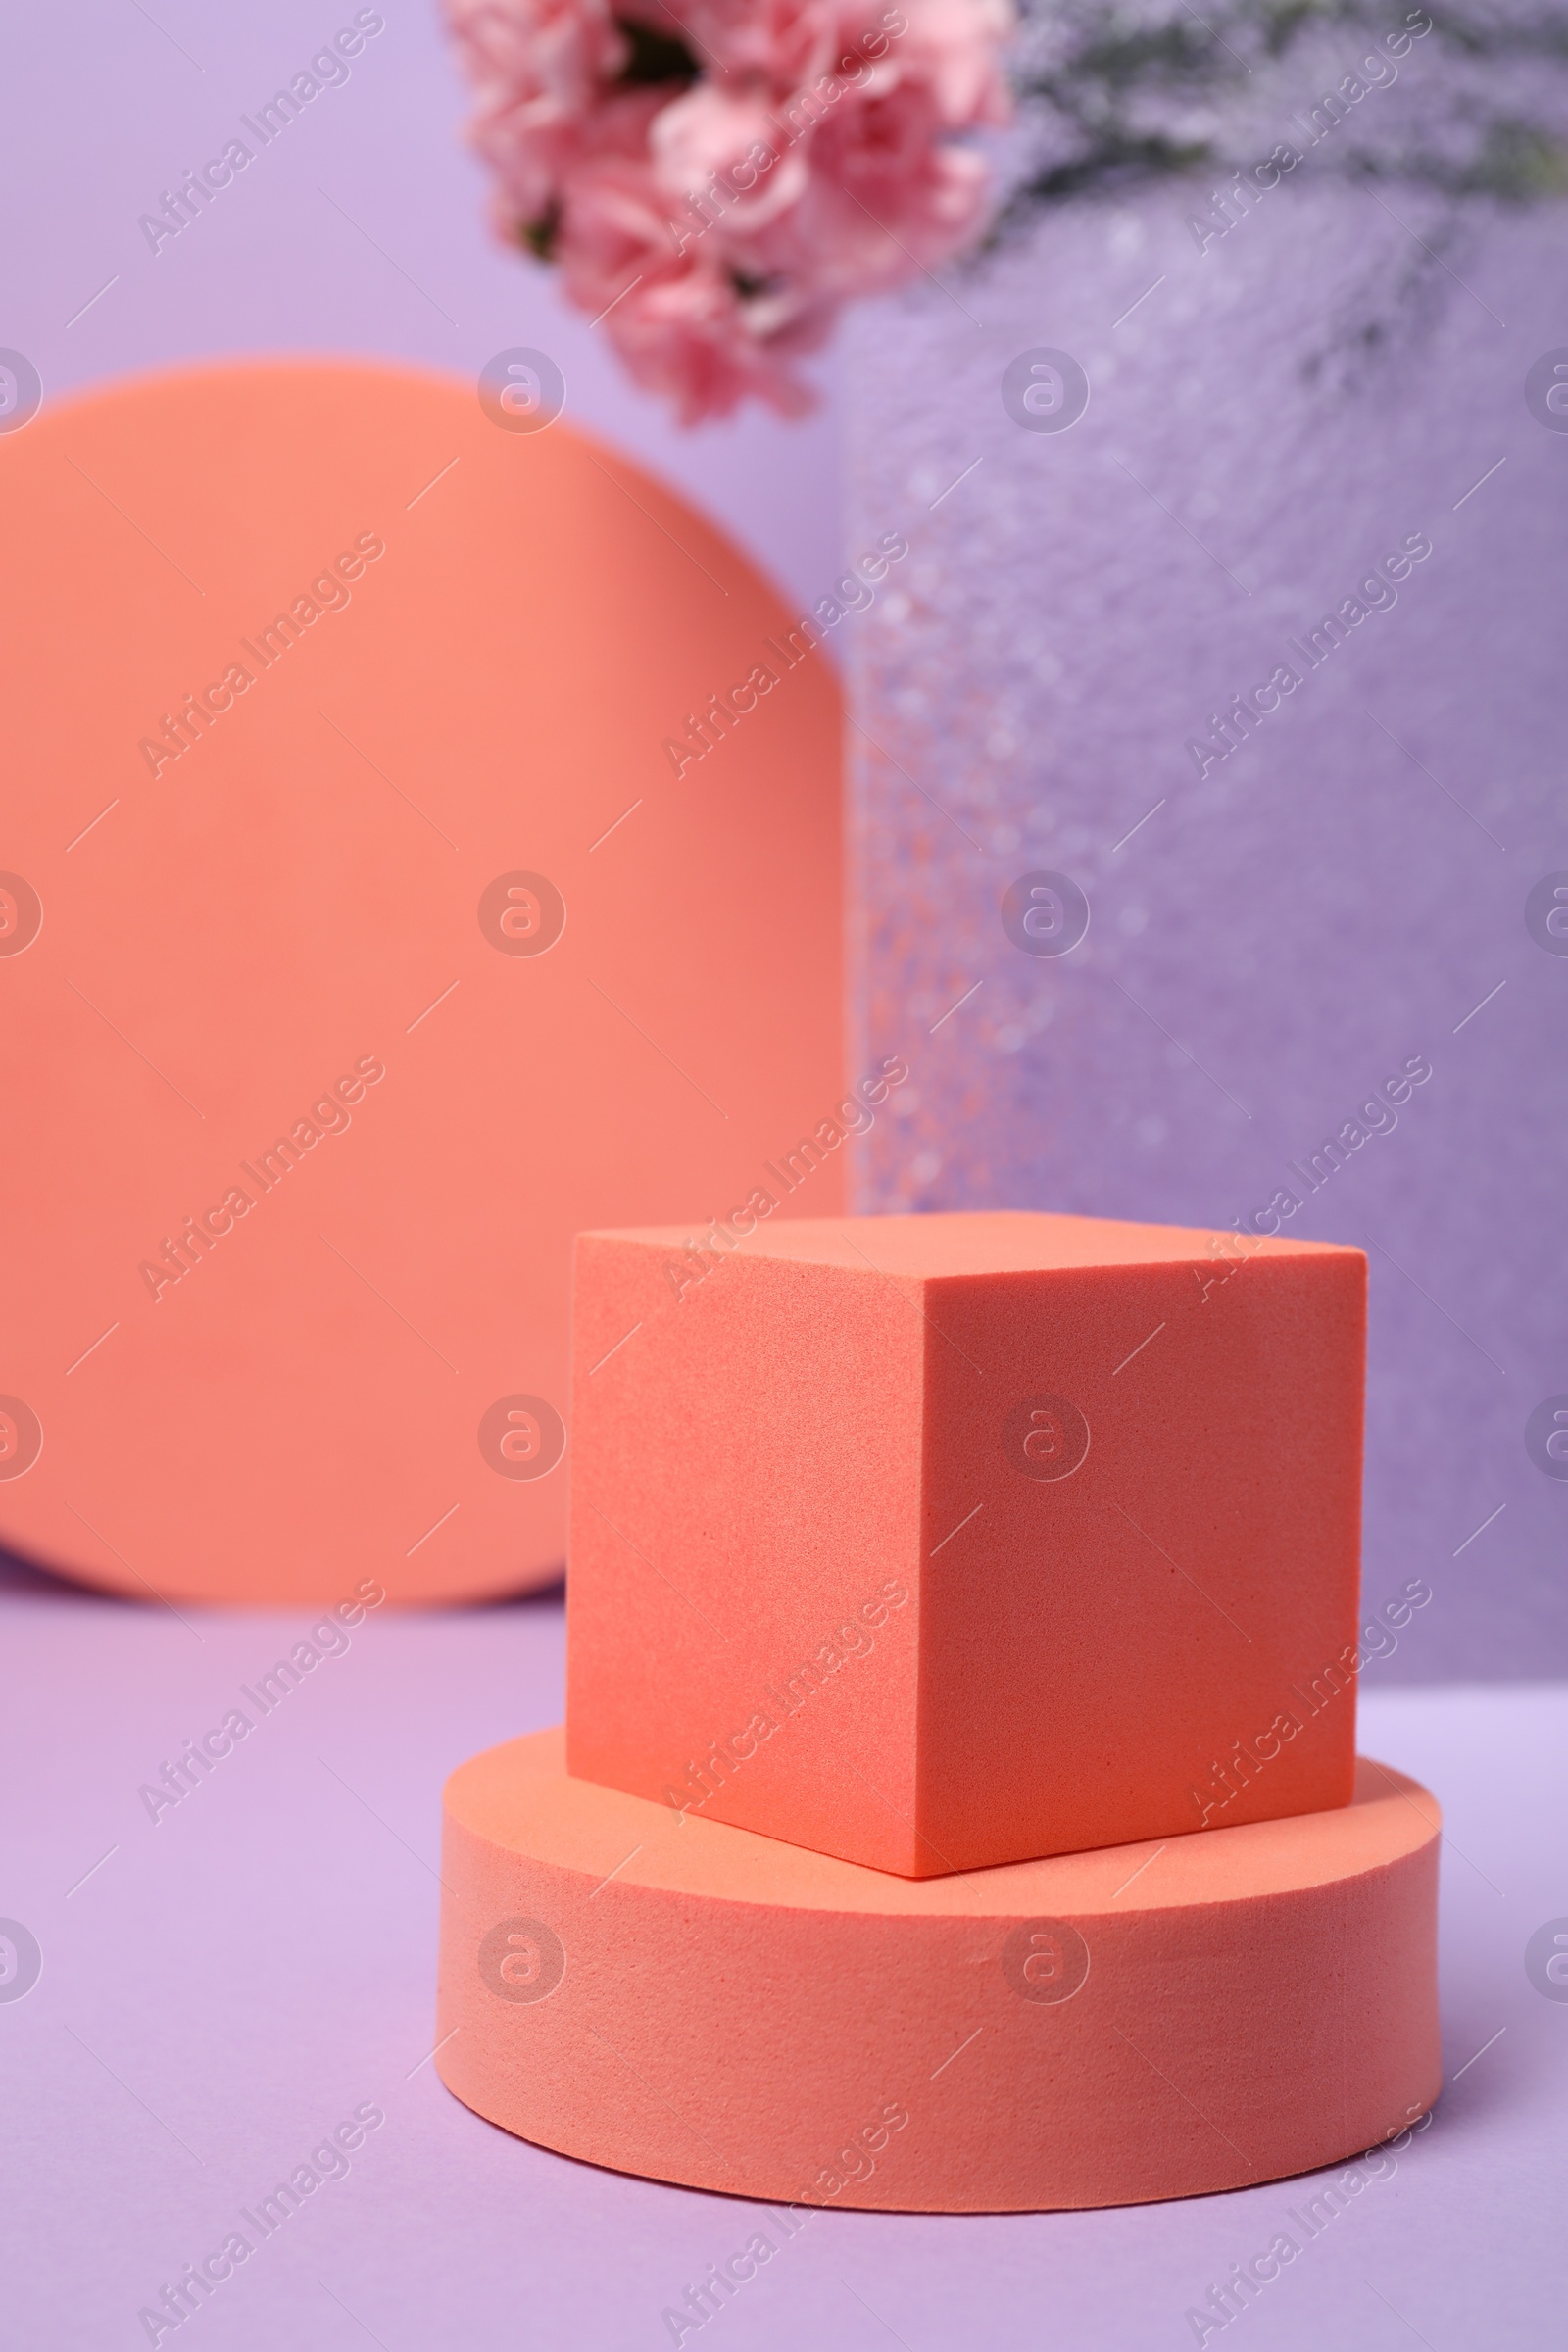 Photo of Geometric figures and pink carnation flowers on light violet background, closeup. Stylish presentation for product